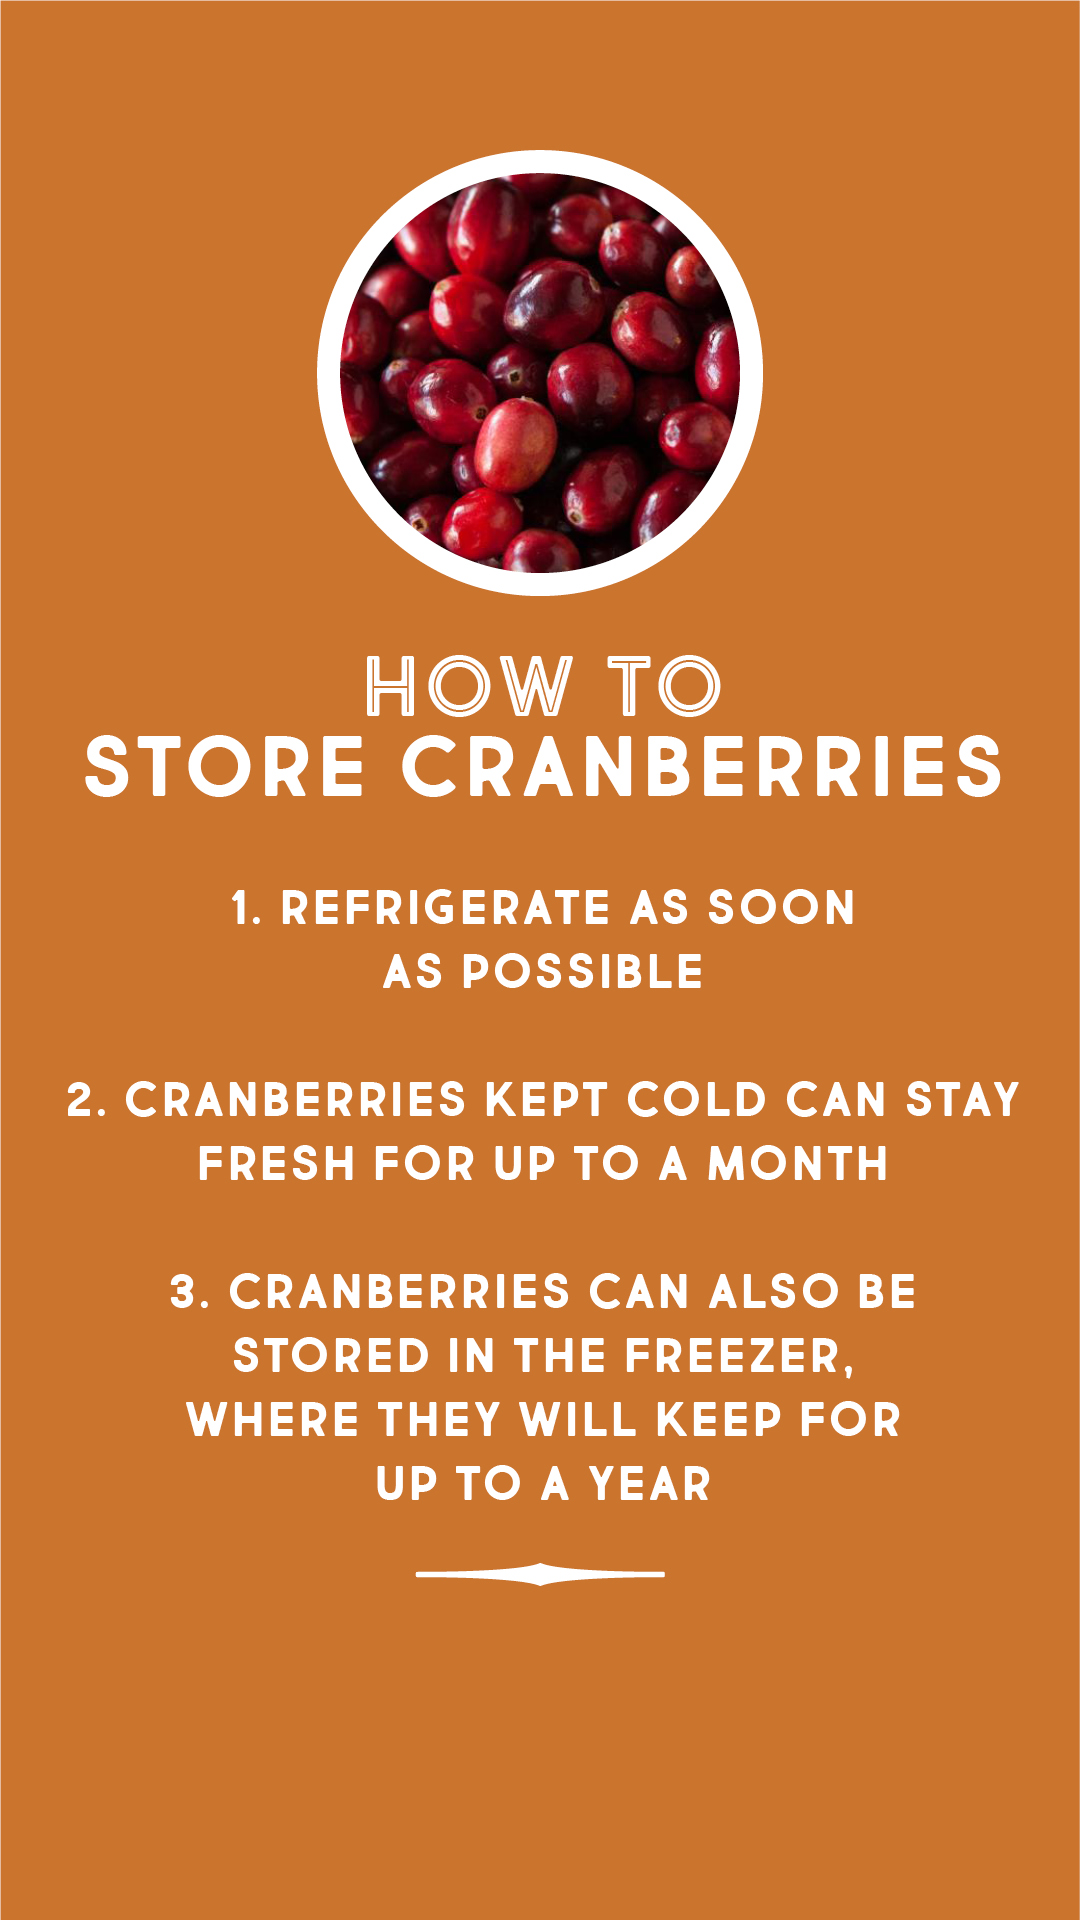 How to store cranberries